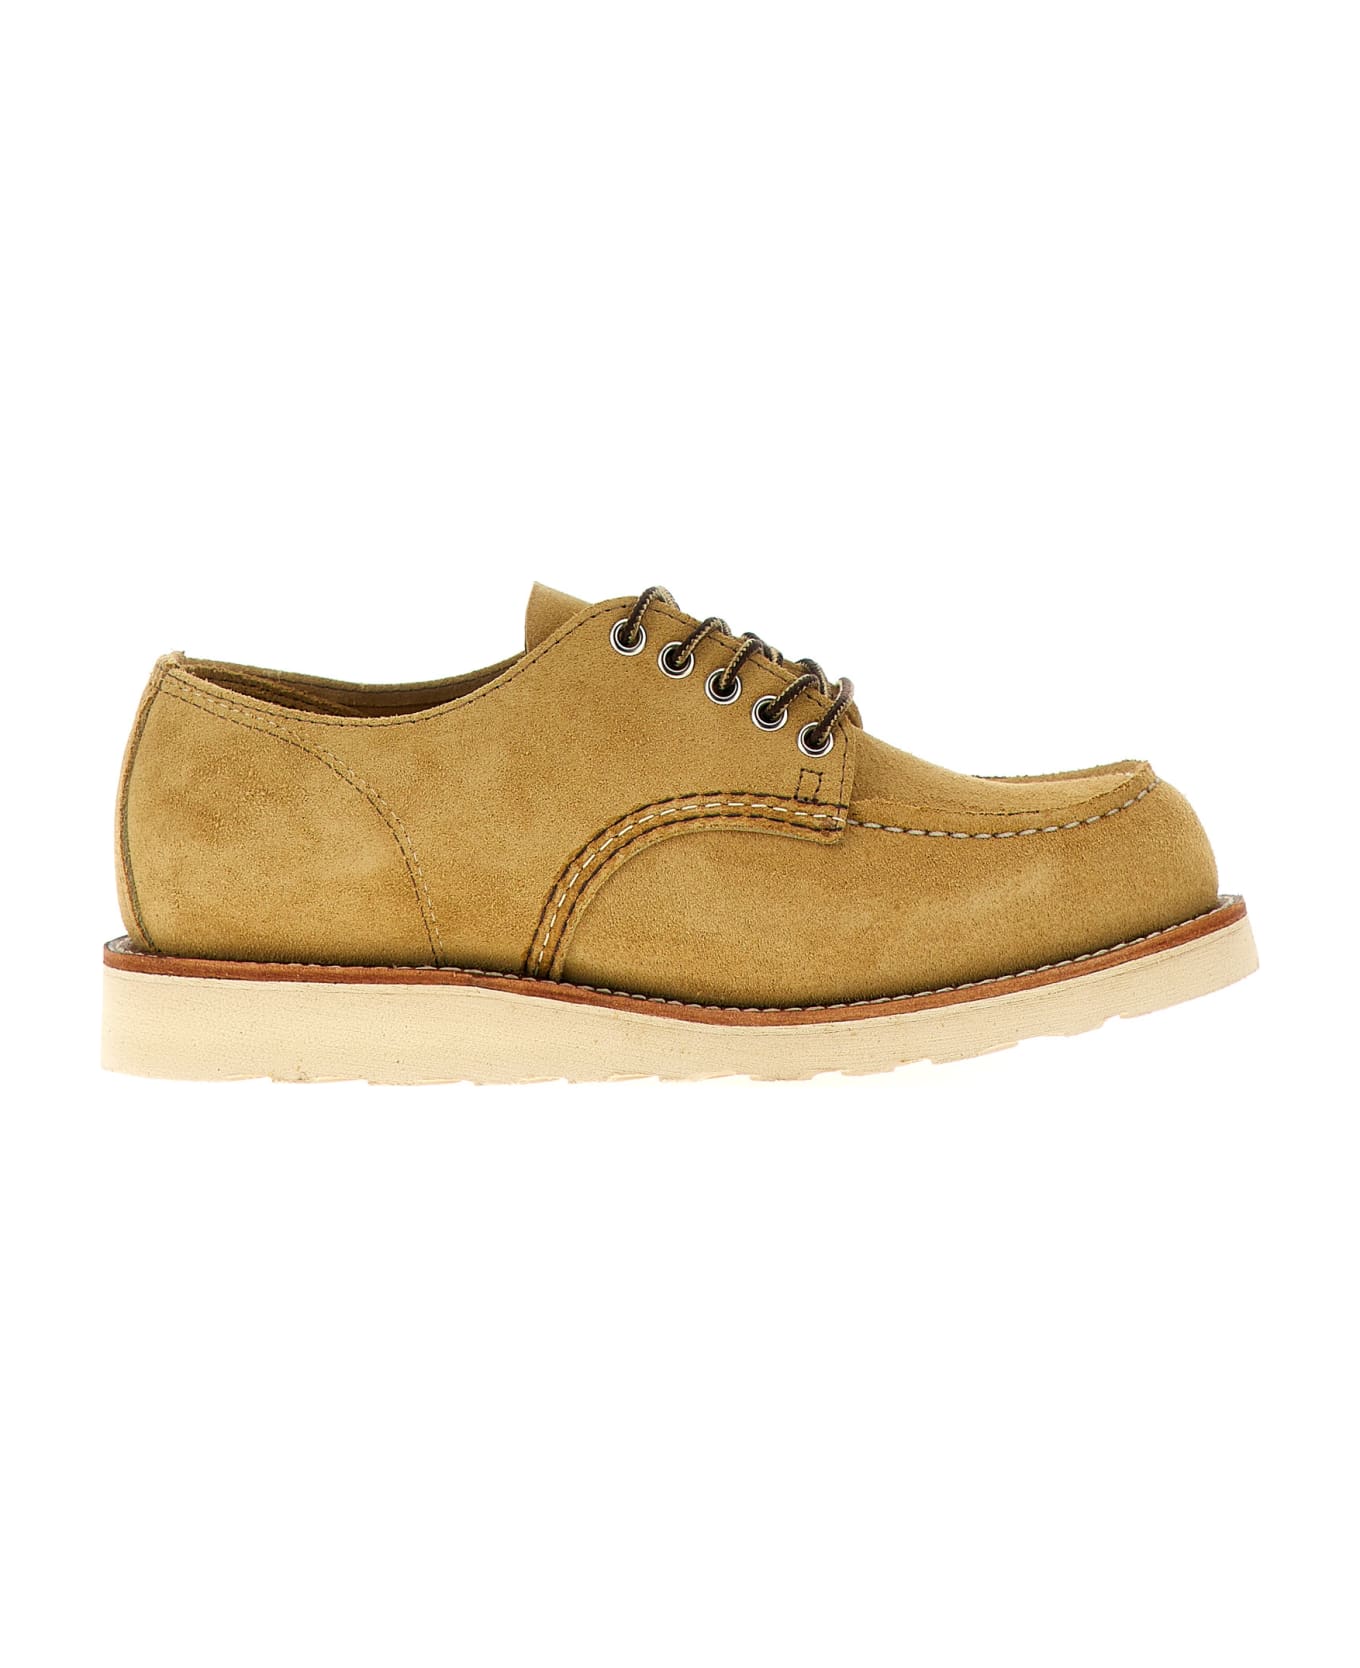 Red Wing 'shop Moc Oxford' Lace Up Shoes - Beige